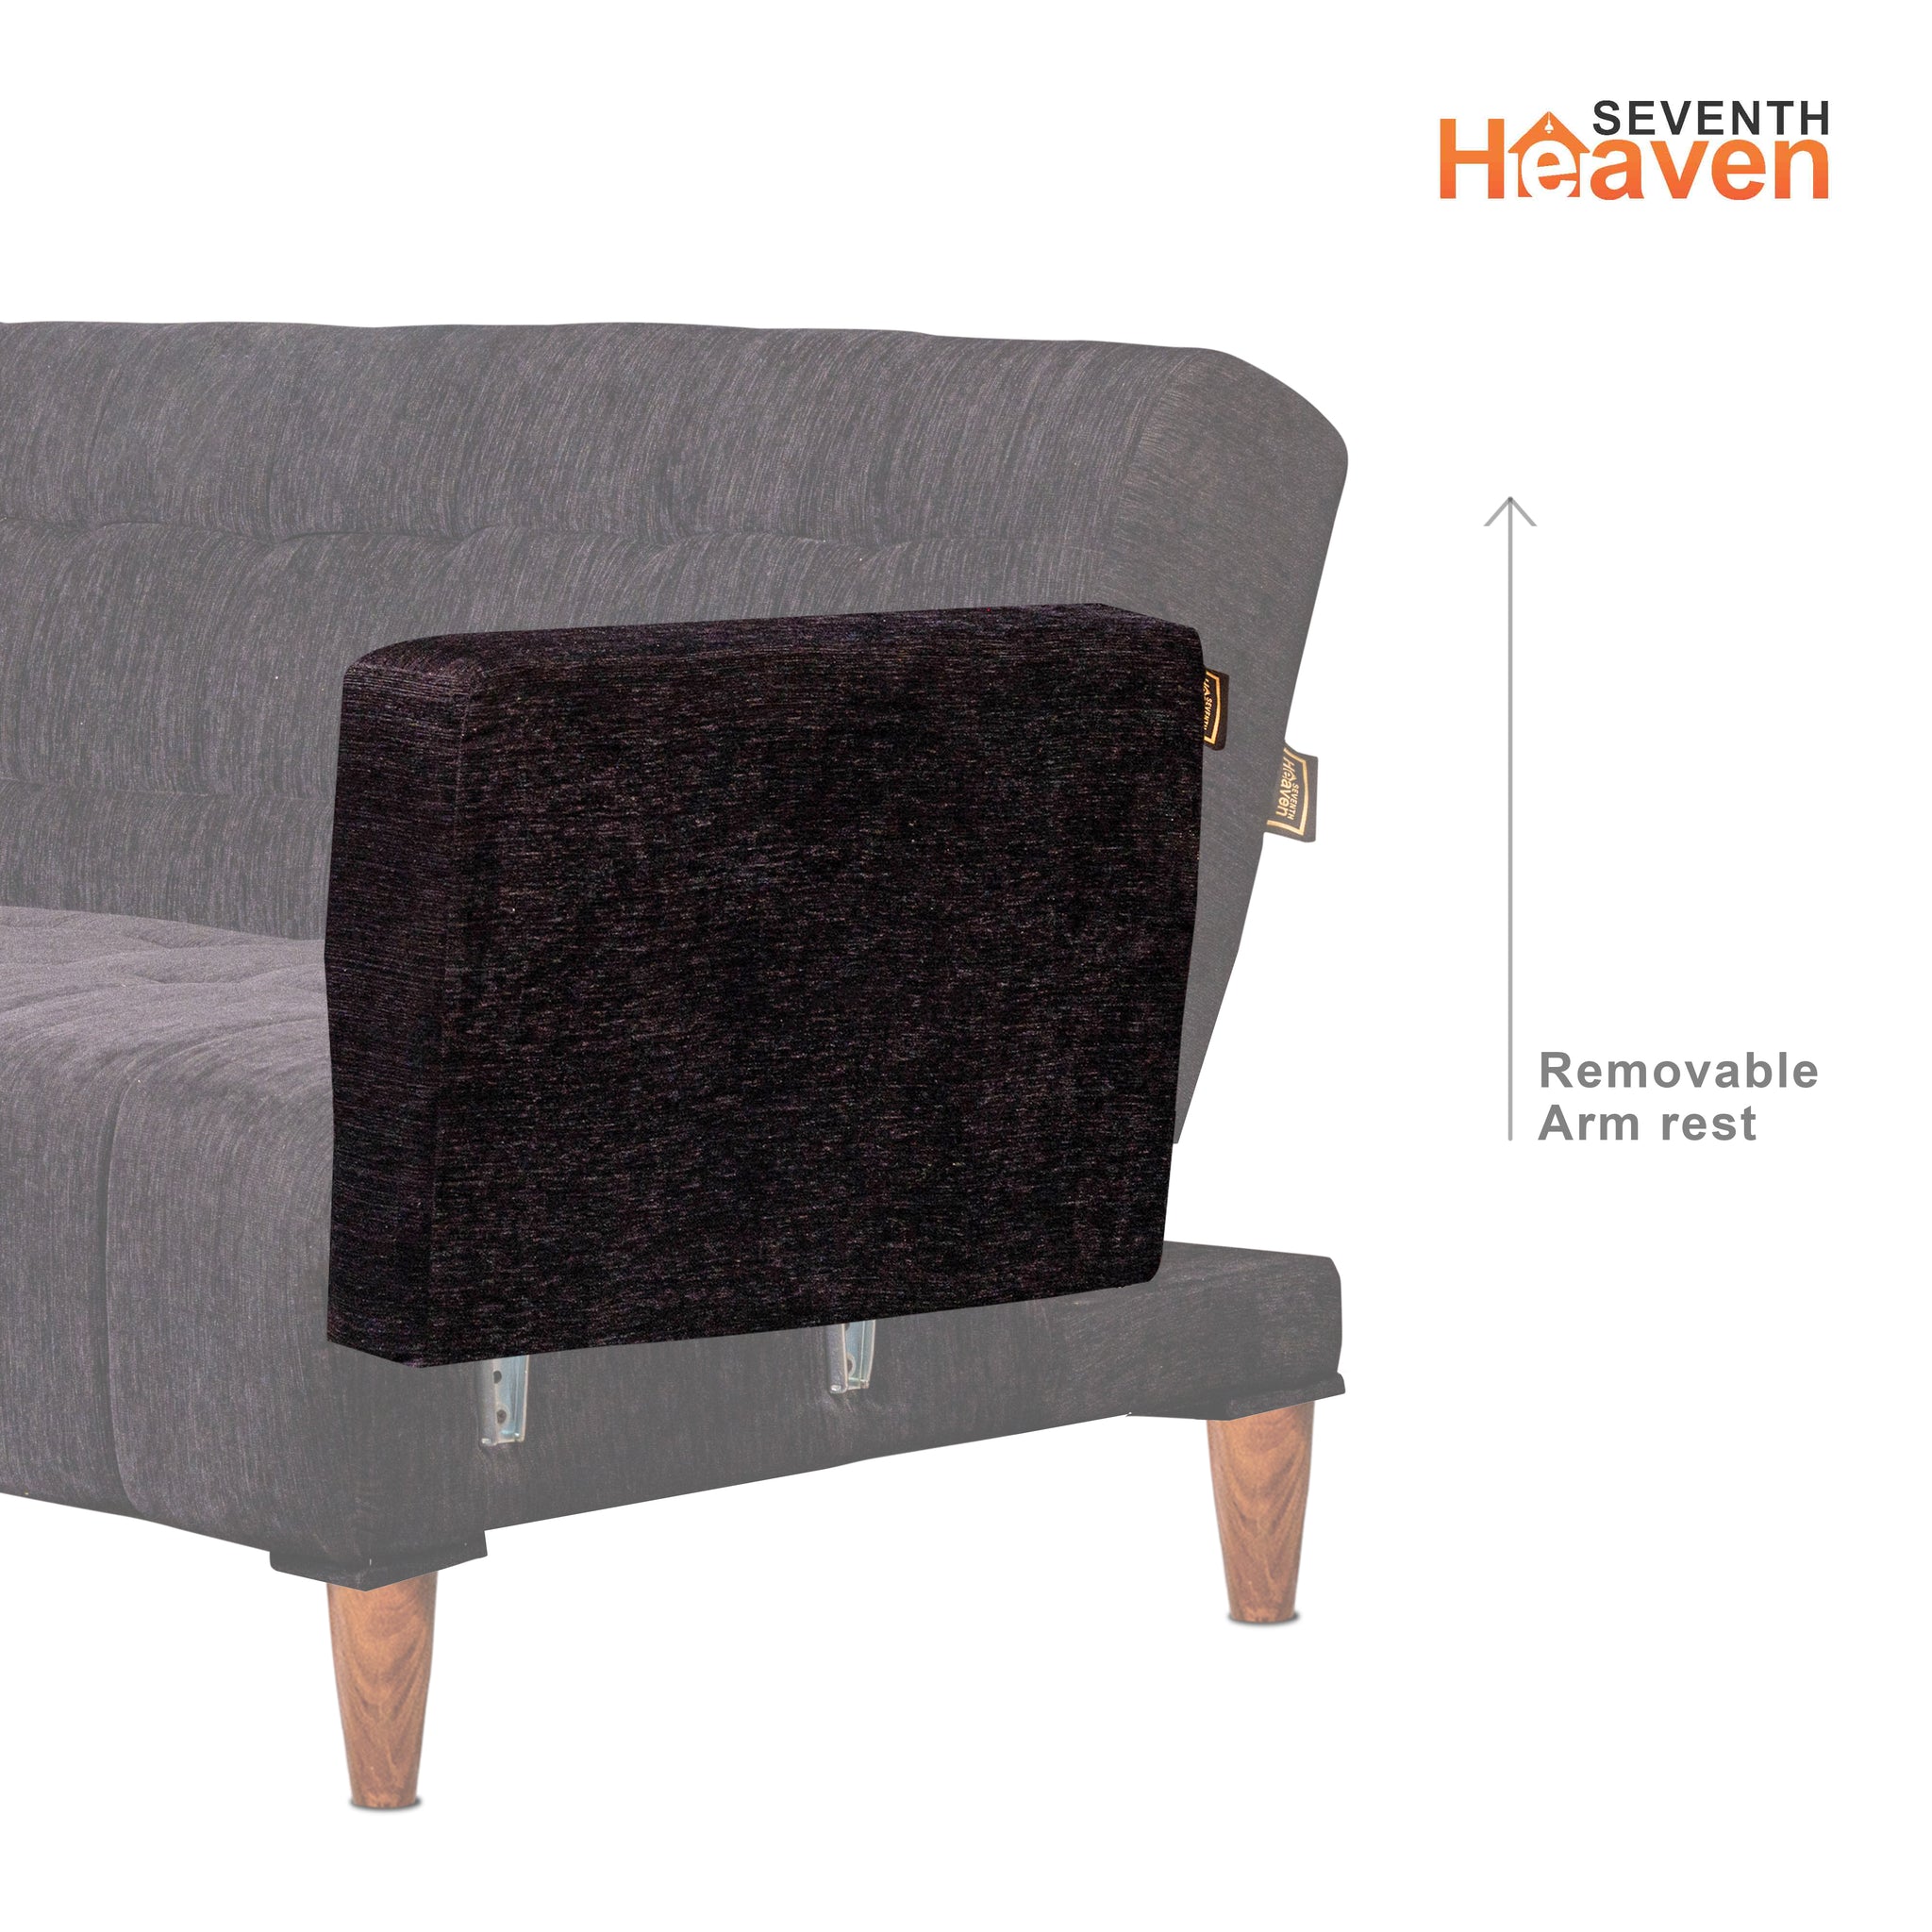 Seventh Heaven Lisbon 4 Seater Wooden Sofa Cum Bed with Armrest. Modern & Elegant Smart Furniture Range for luxurious homes, living rooms and offices. Use as a sofa, lounger or bed with removable armrest. Perfect for guests. Molphino fabric with sheesham polished wooden legs. Black colour.